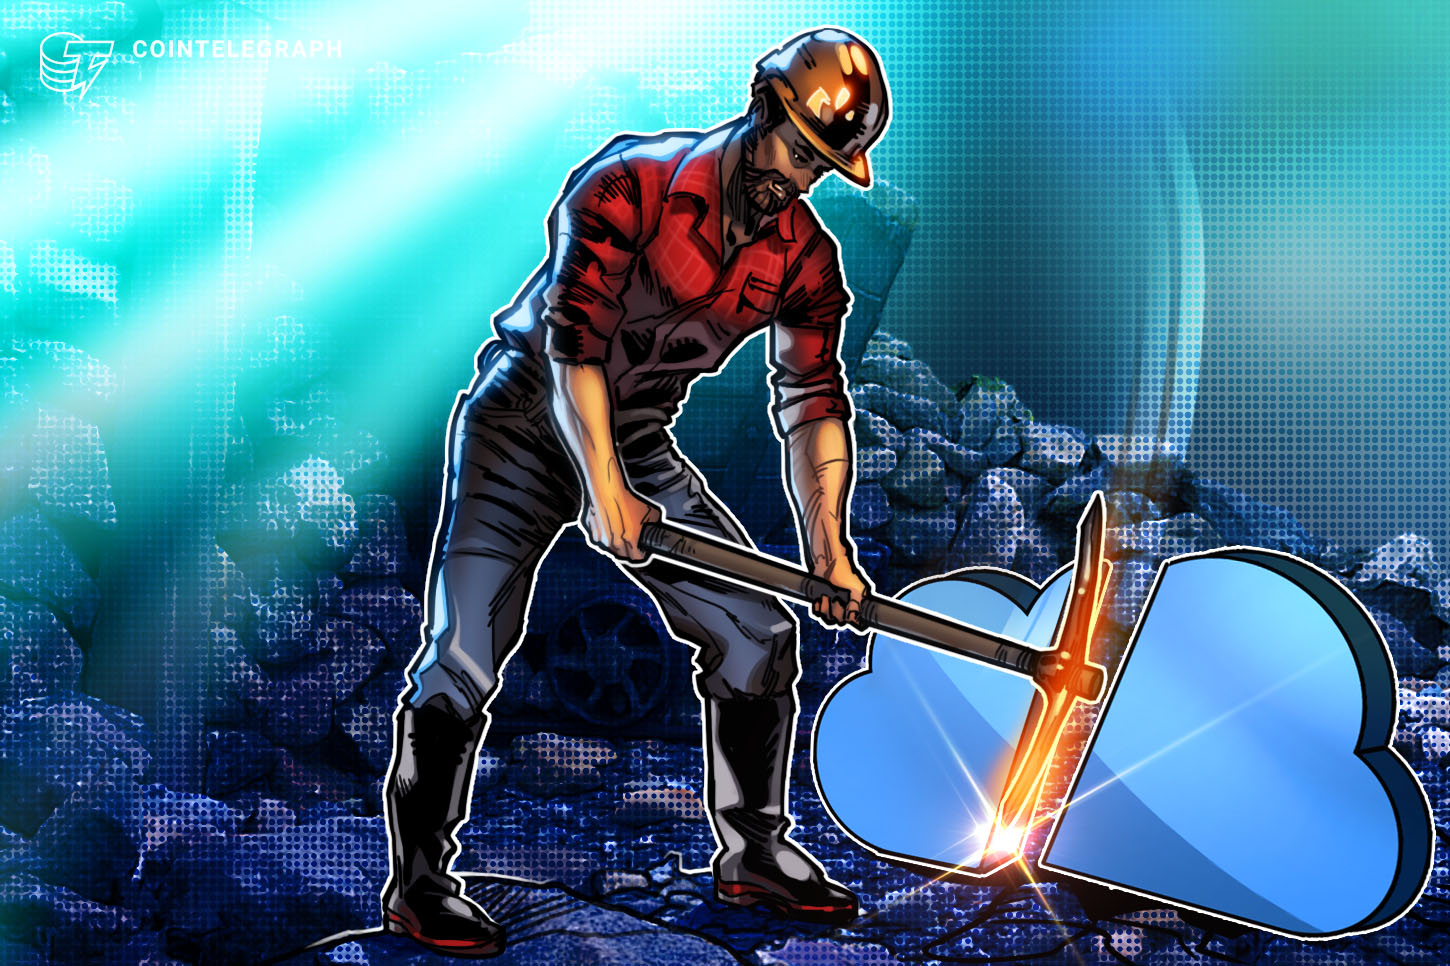 BTC.prime Launches ‘Joint Mining’ Platform, Pitching It as a Cloud Mining Killer